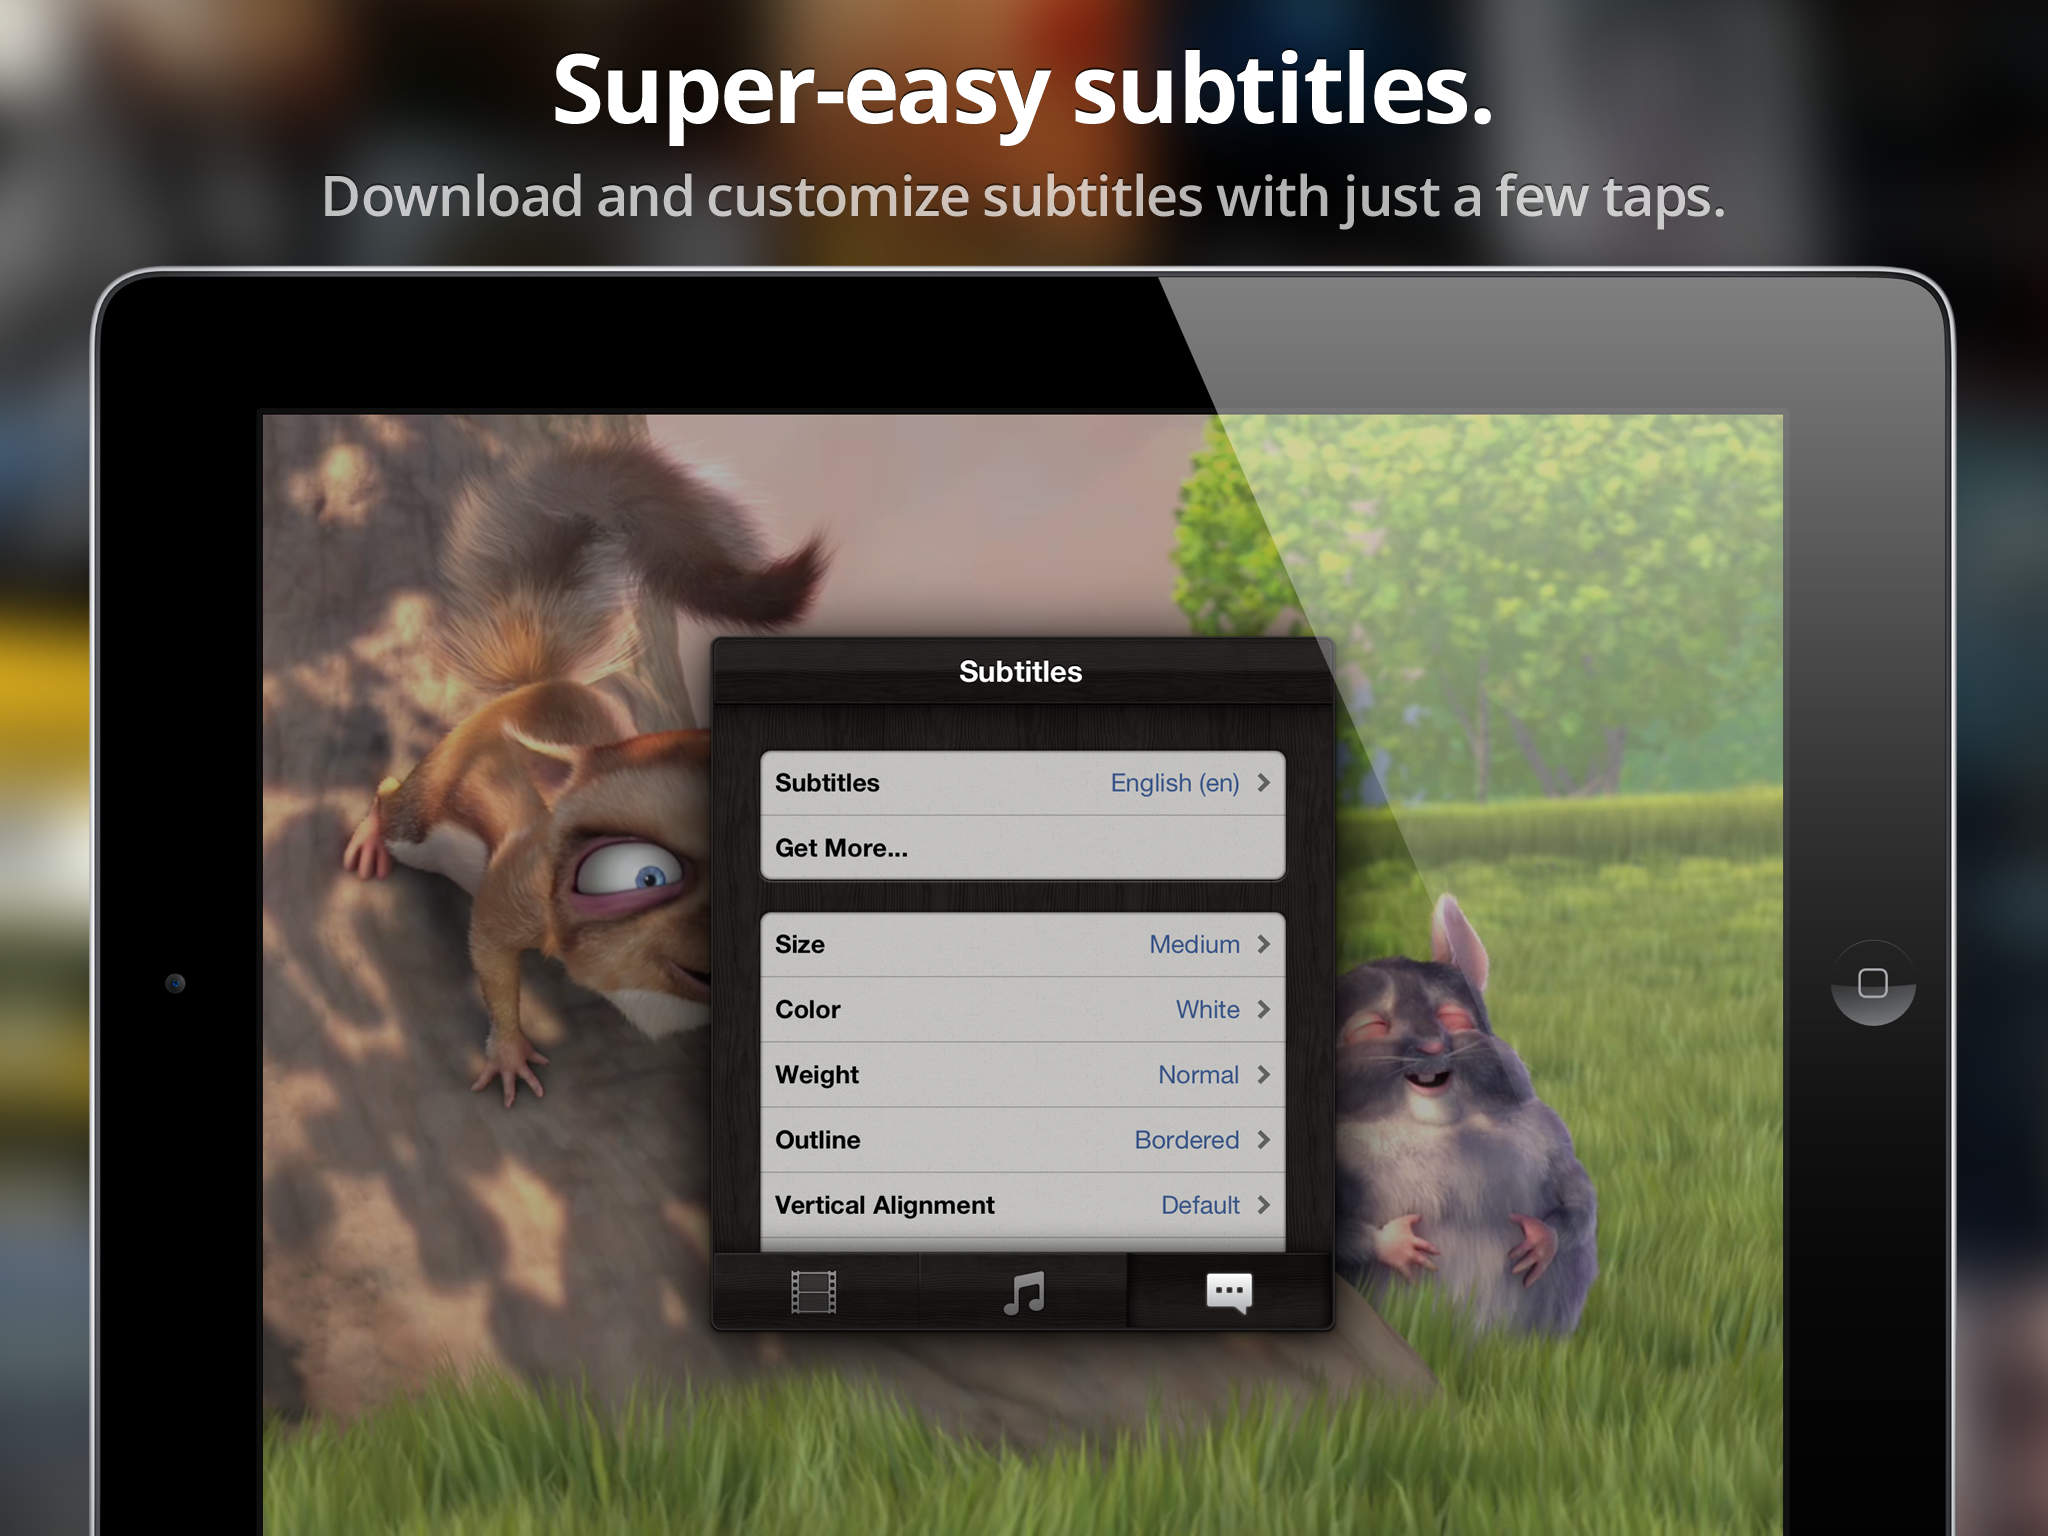 Infuse 1.4 Update Brings Subtitles Over AirPlay, Improved Playback for 1080p Content and More